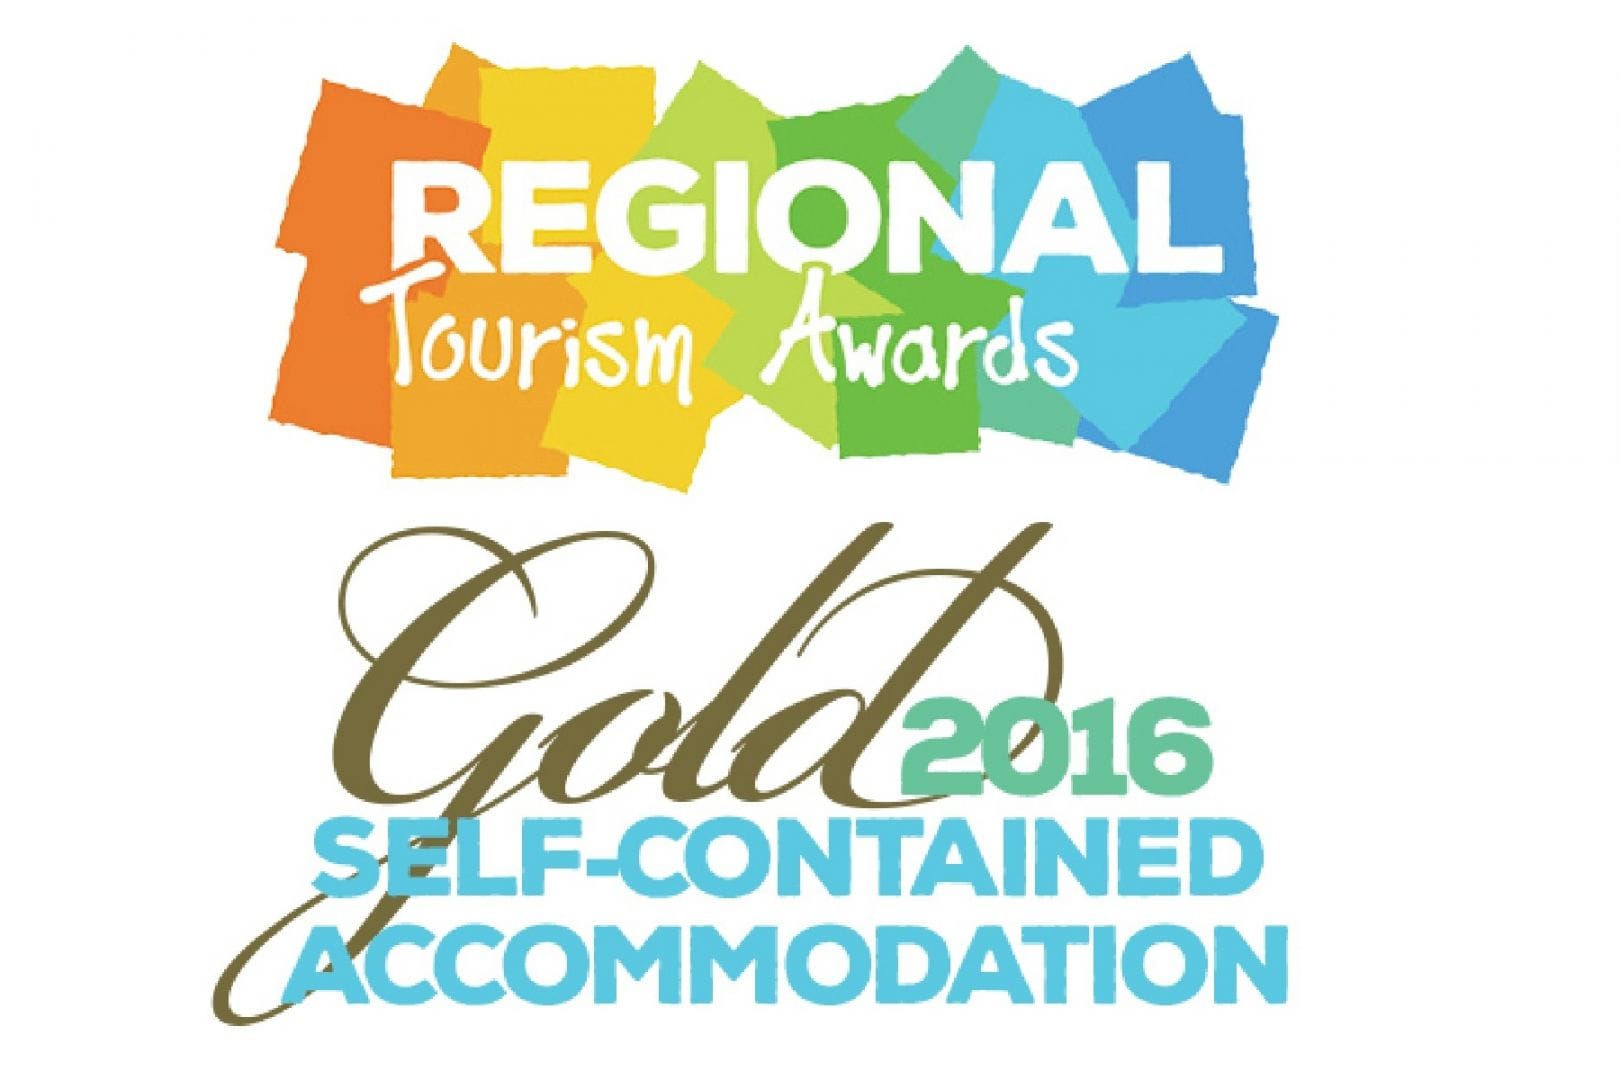 Gold Award 2016 Self Contained Accommodation